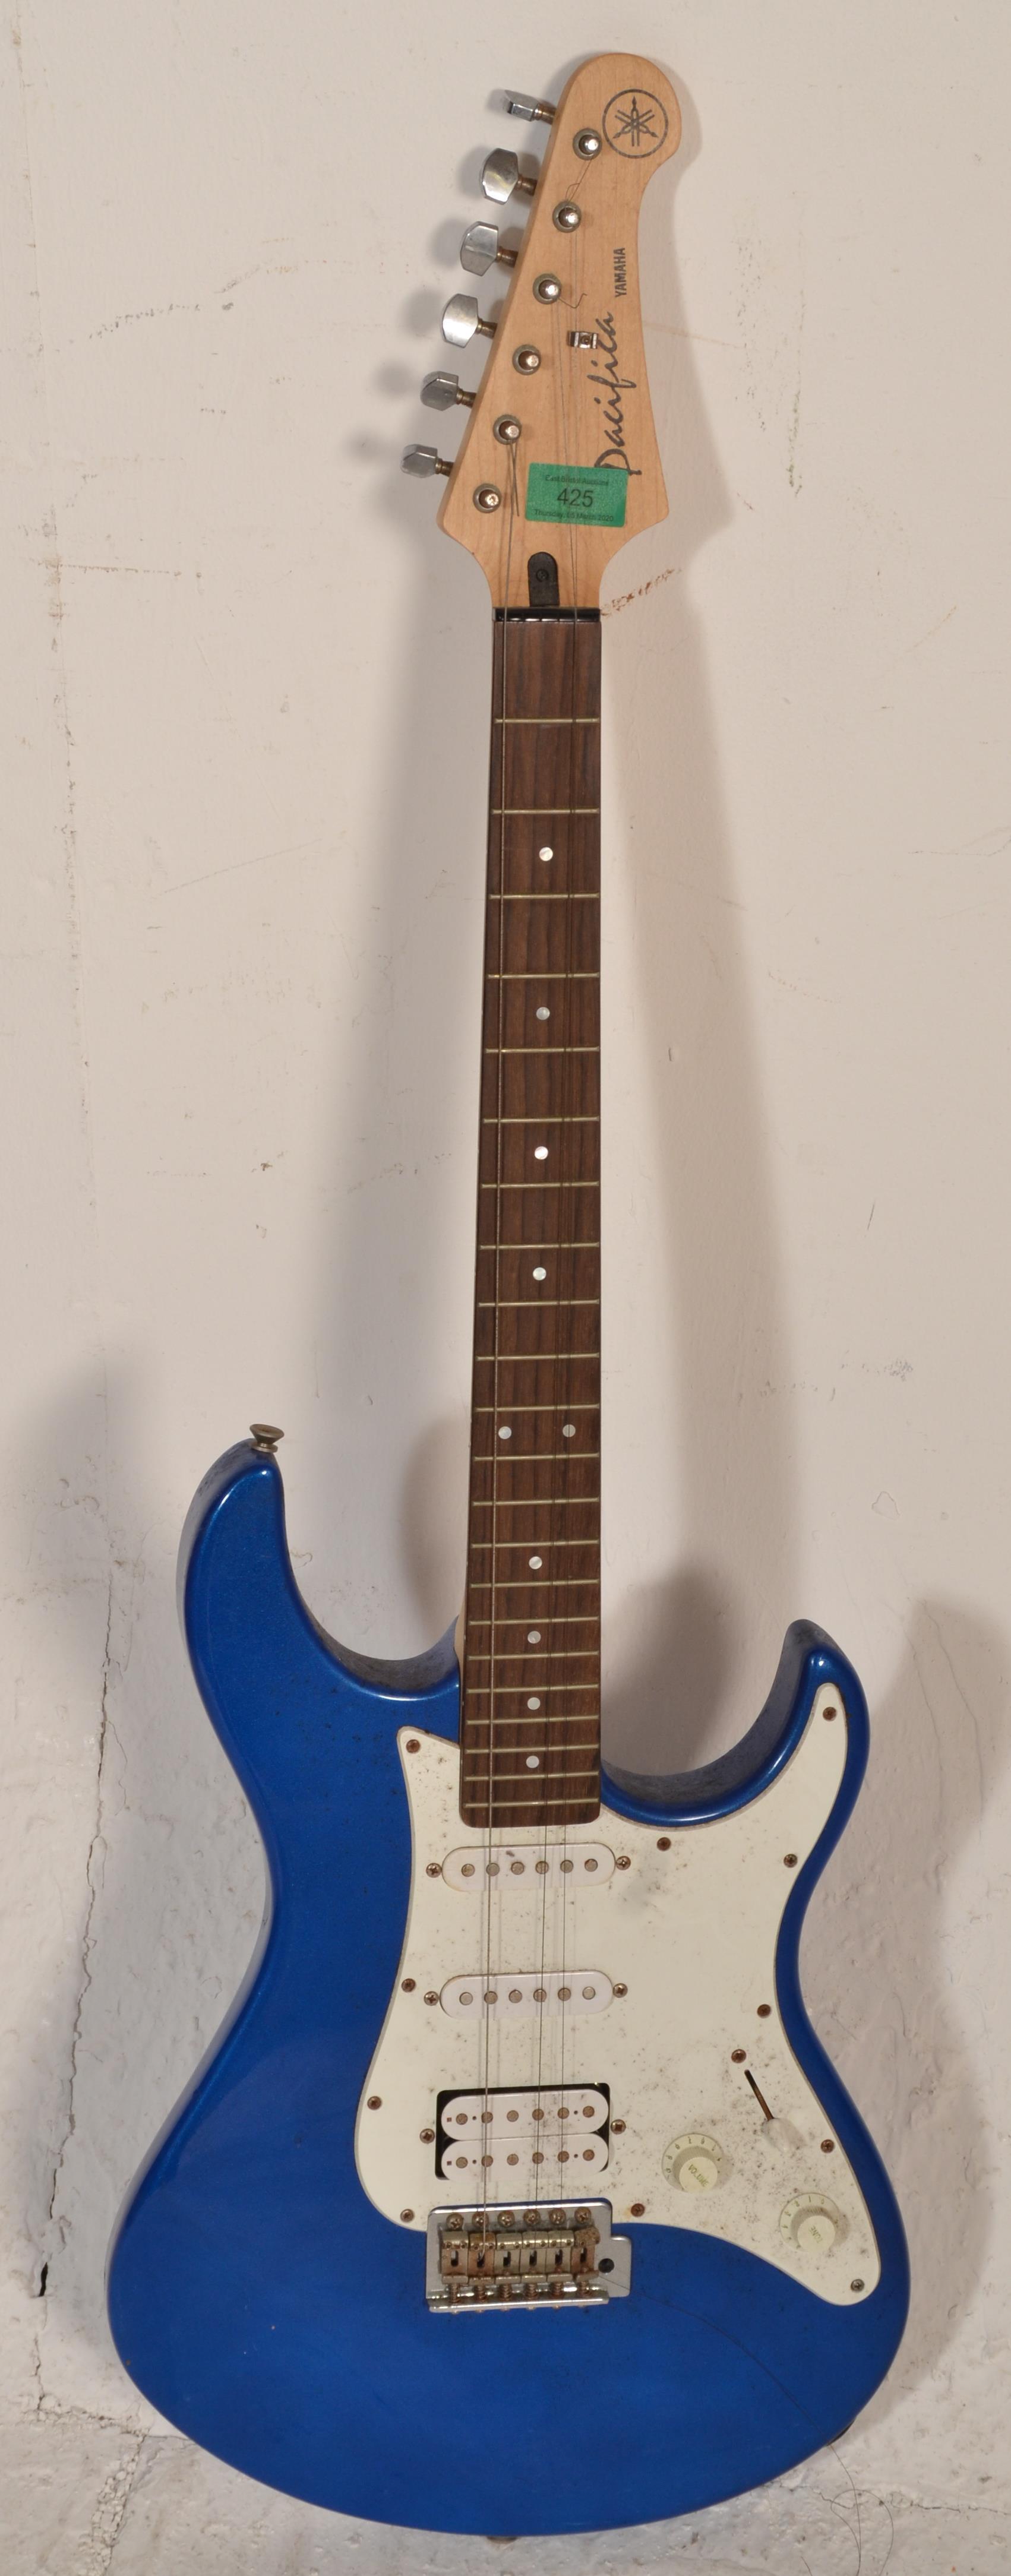 A Yamaha Pacifica stratocaster style electric guitar having a blue painted body with a white